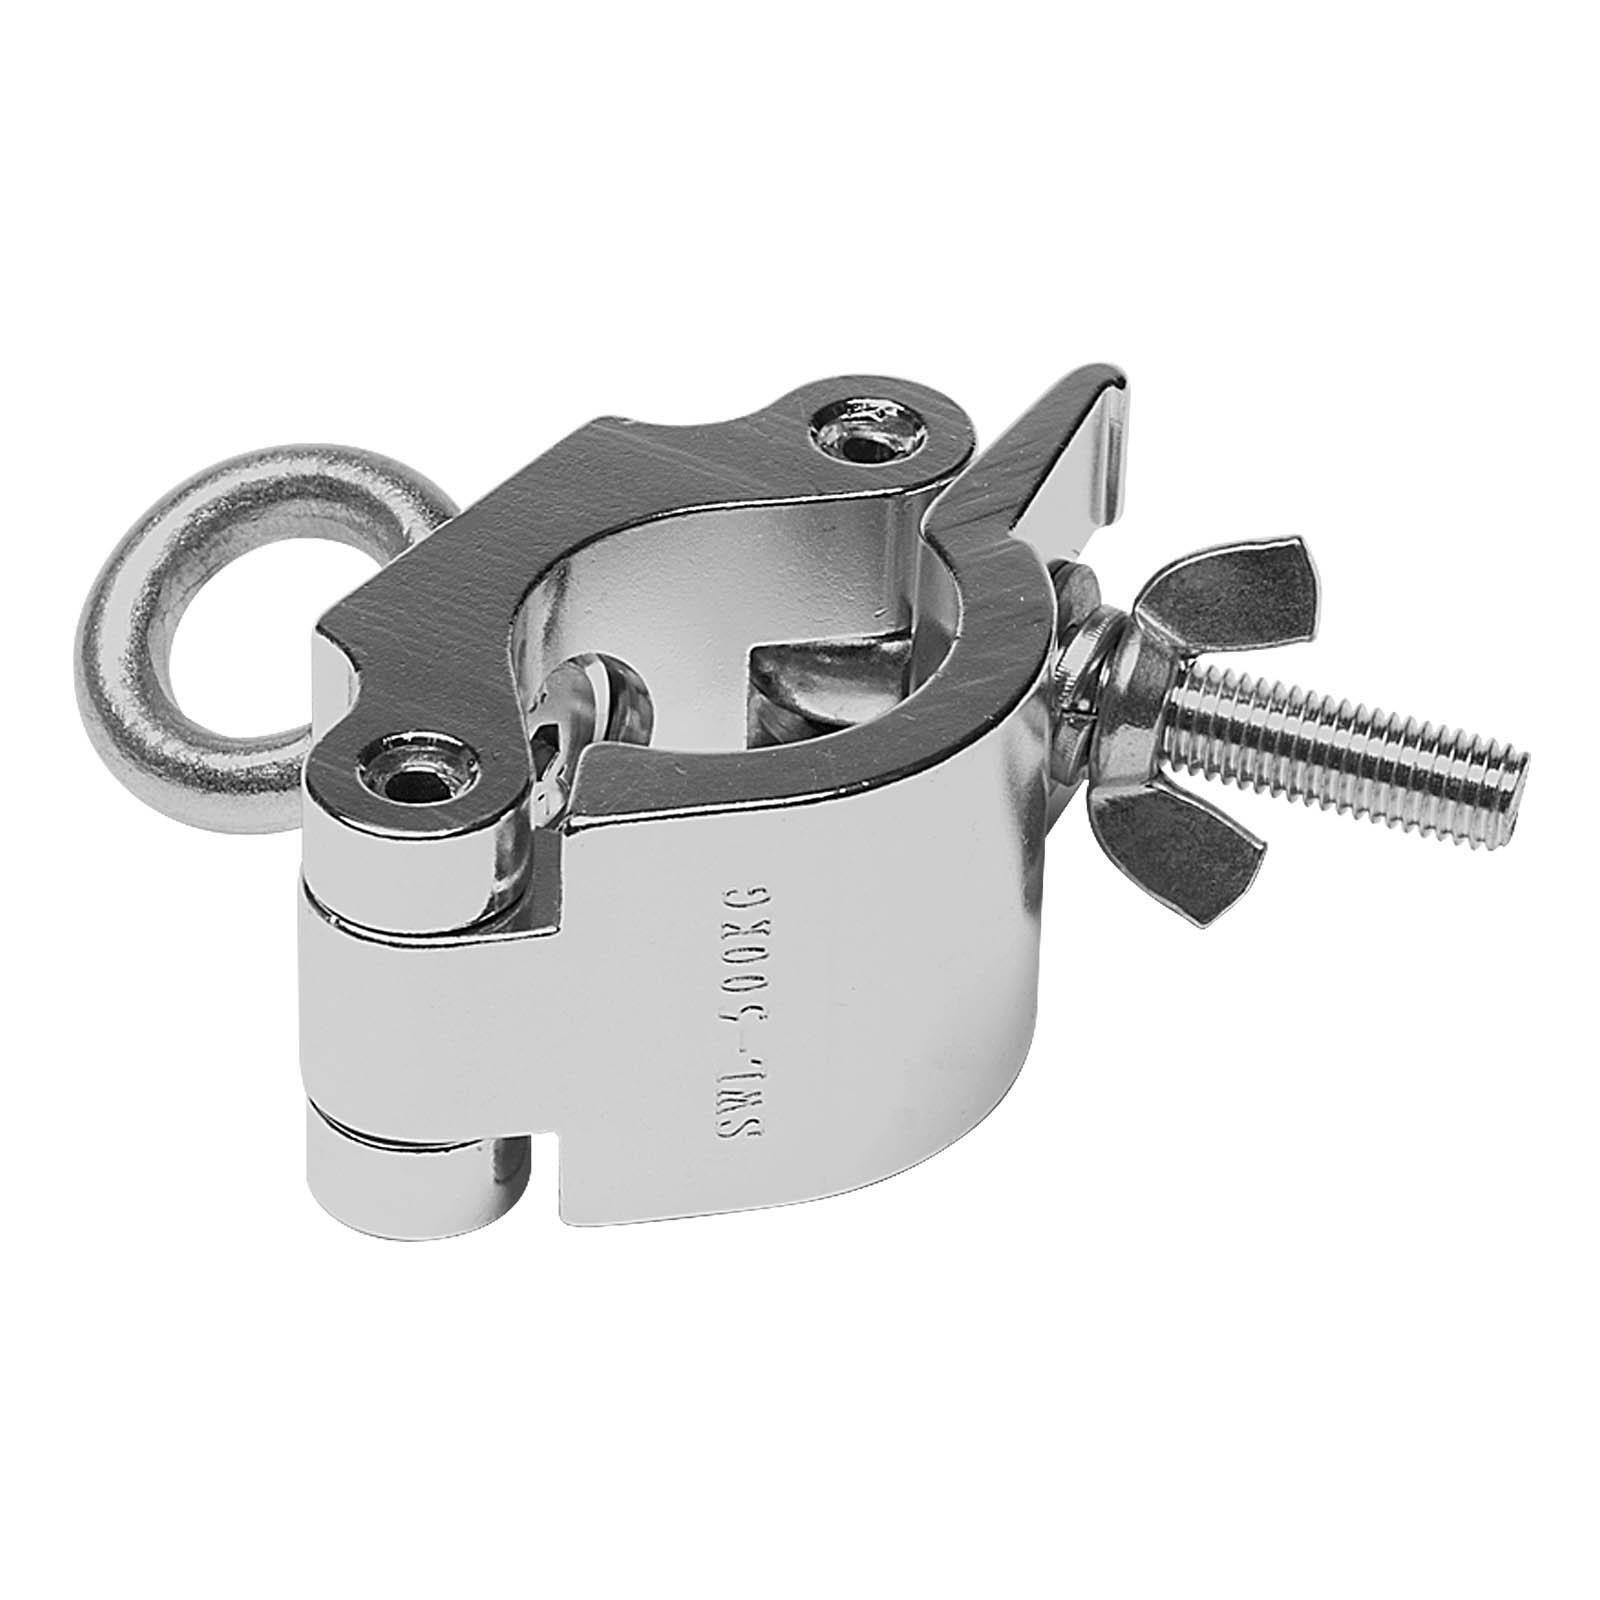 Global Truss Eye Clamp Heavy Duty Clamp With Eyebolt For 50mm Tubing